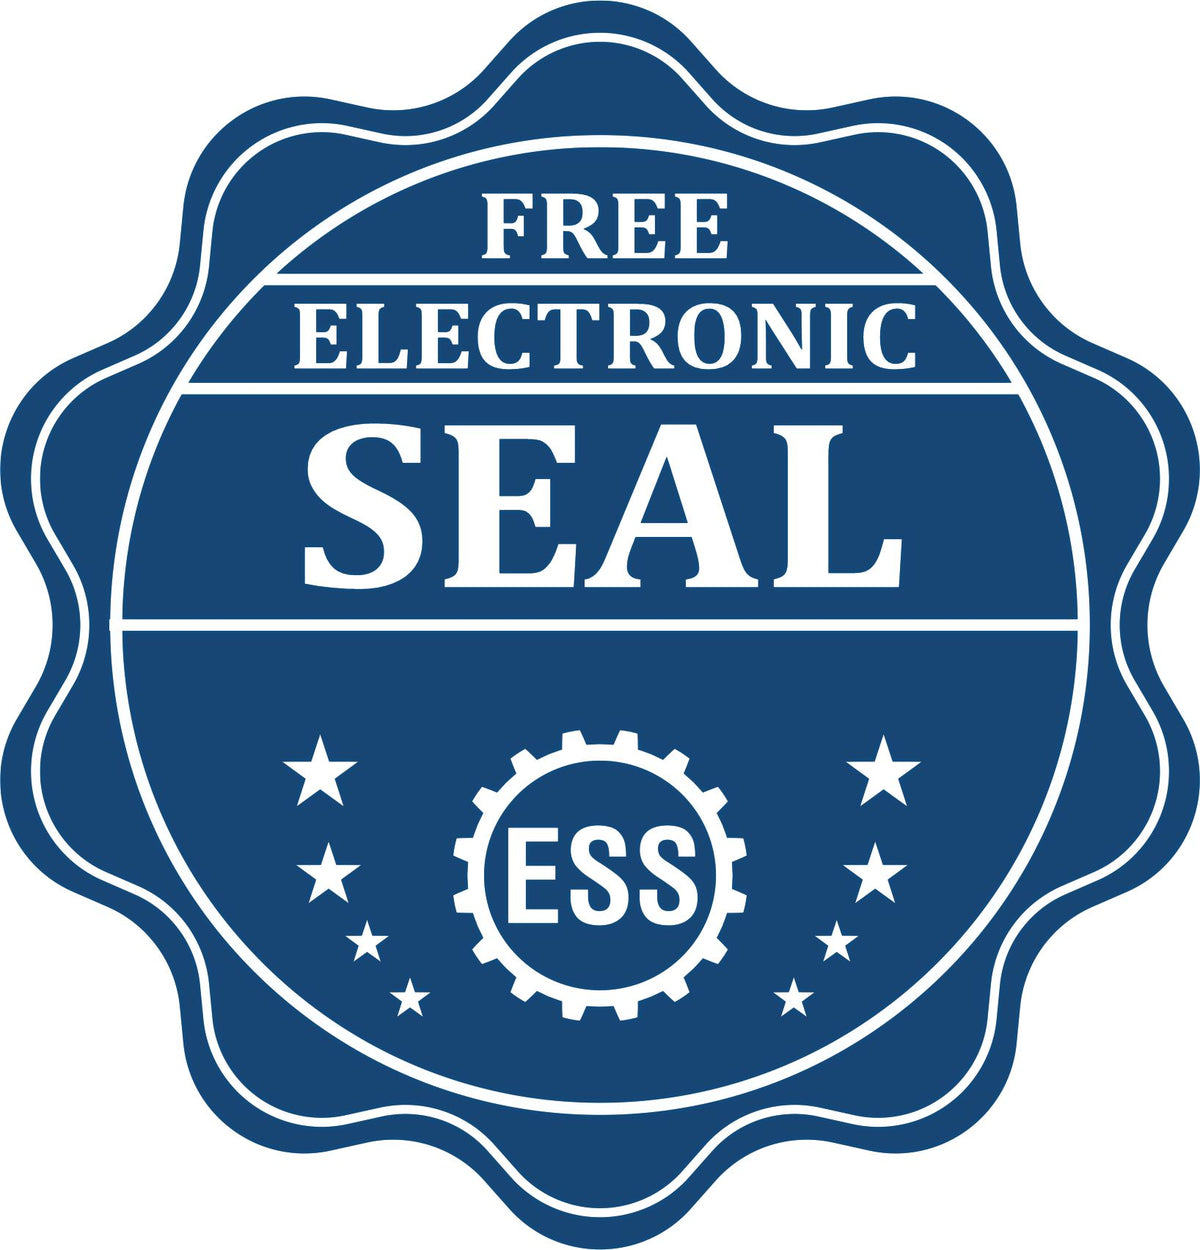 A badge showing a free electronic seal for the Heavy Duty Cast Iron Texas Engineer Seal Embosser with stars and the ESS gear on the emblem.